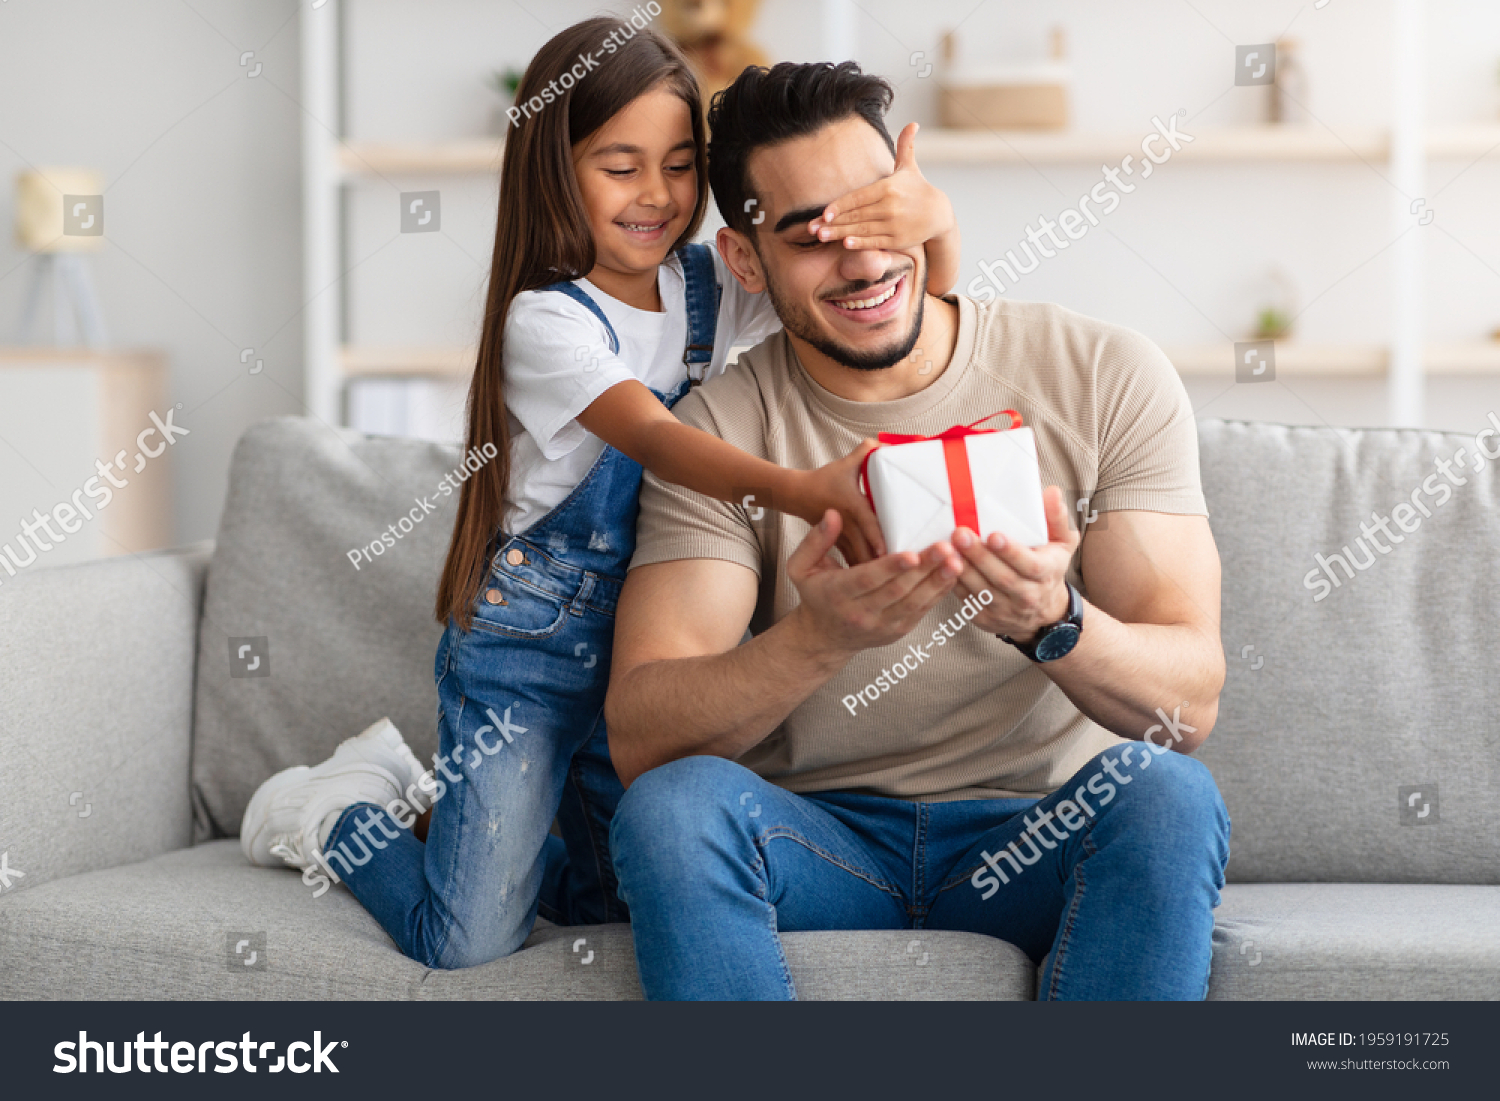 Portrait of cute little girl holding and giving wrapped gift box, making surprise for her excited dad, covering his eyes, greeting young man with father's day or birthday, celebrating at home #1959191725